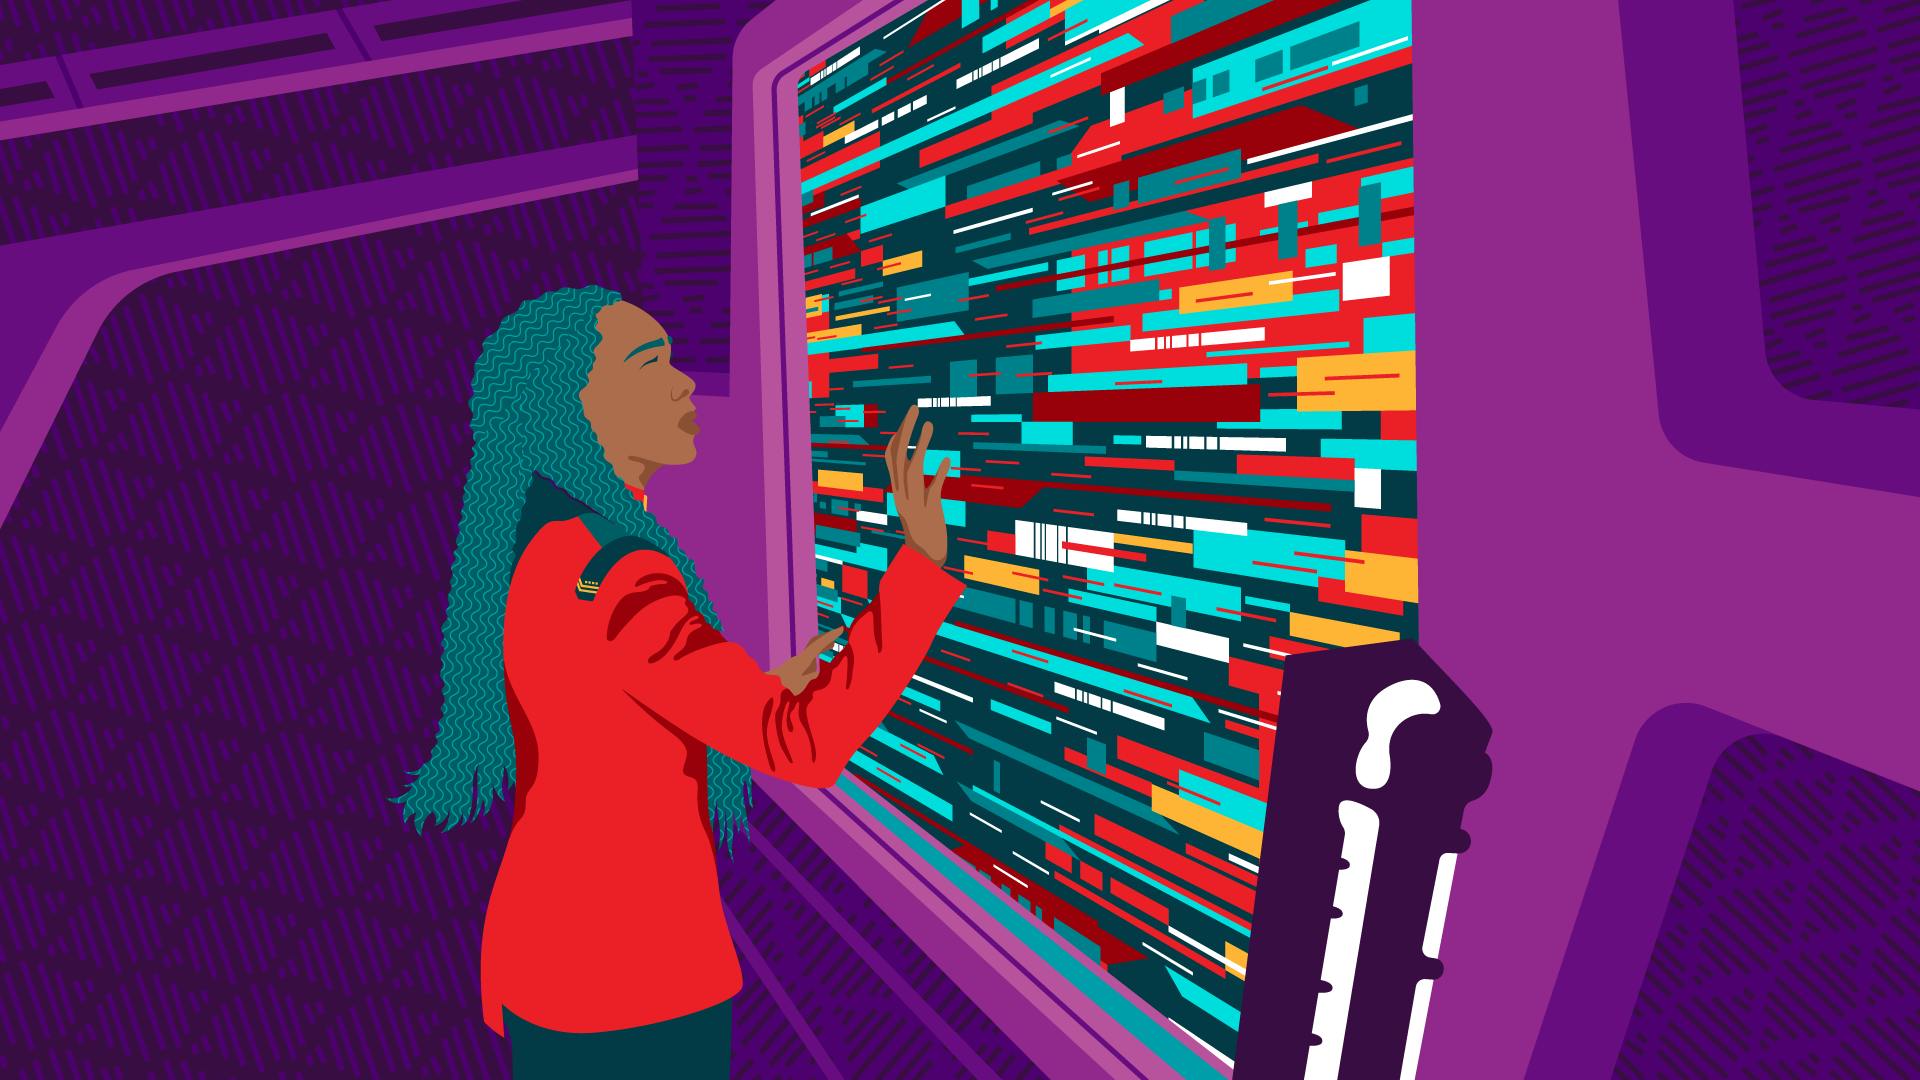 Graphic illustration of Burnham touching a glitchy monitor in 'Face the Strange'